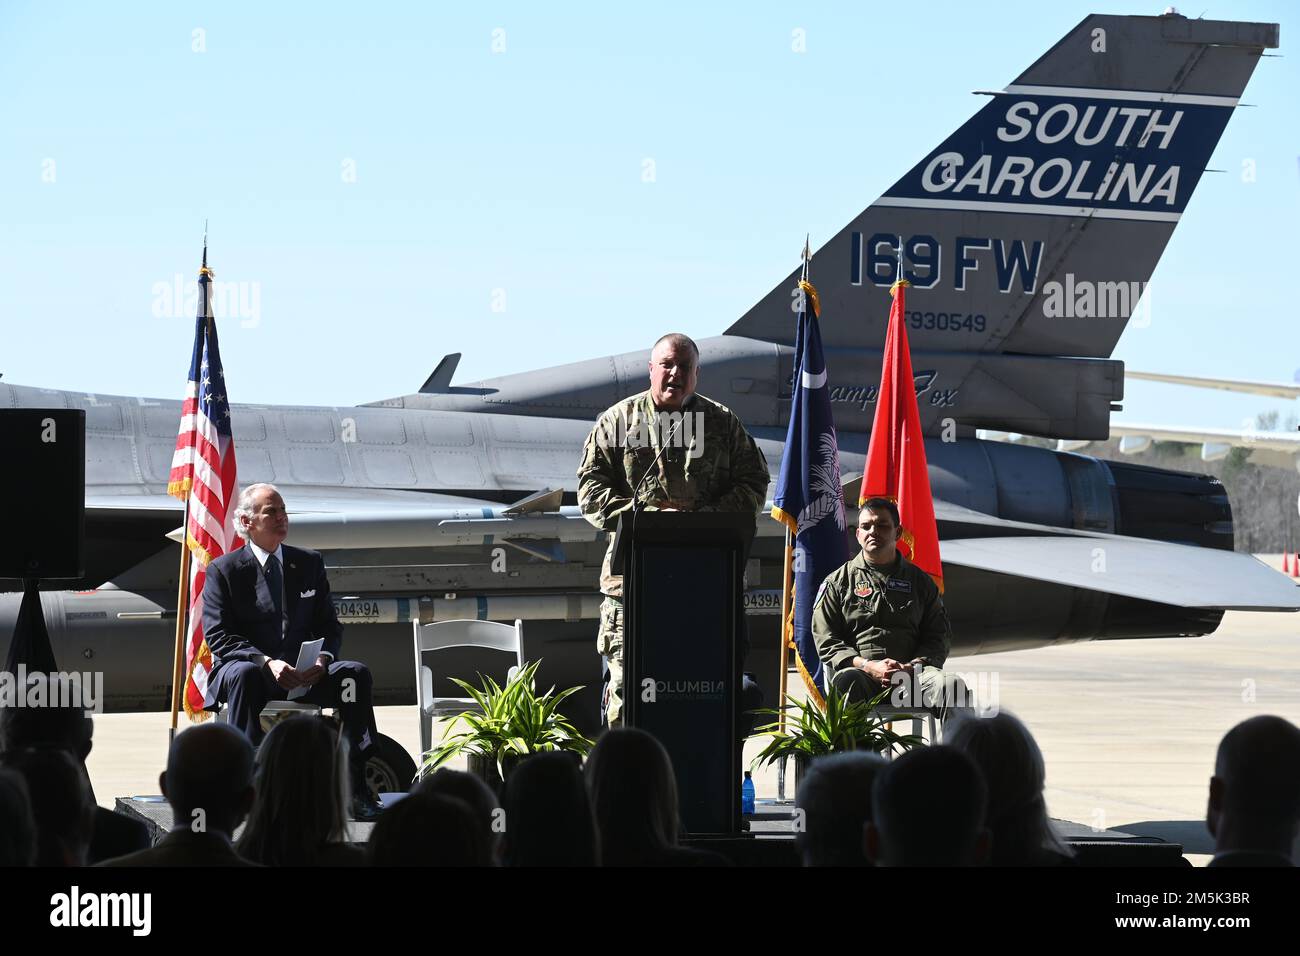 U.S. Army Maj. Gen. Van McCarty, The Adjutant General of South Carolina, speaks to local media and distinguished visitors at the Columbia Metropolitan Airport West Cargo Hangar, Columbia, South Carolina during a press conference, March 21, 2022. Columbia Metropolitan Airport hosts a press conference to announce a six-month temporary move of F-16 fighter jet flying operations from the the South Carolina Air National Guard's 169th Fighter Wing at nearby McEntire Joint National Guard Base to their airport. This joint partnership, regarding the temporary relocation of F-16 aircraft, will begin in Stock Photo